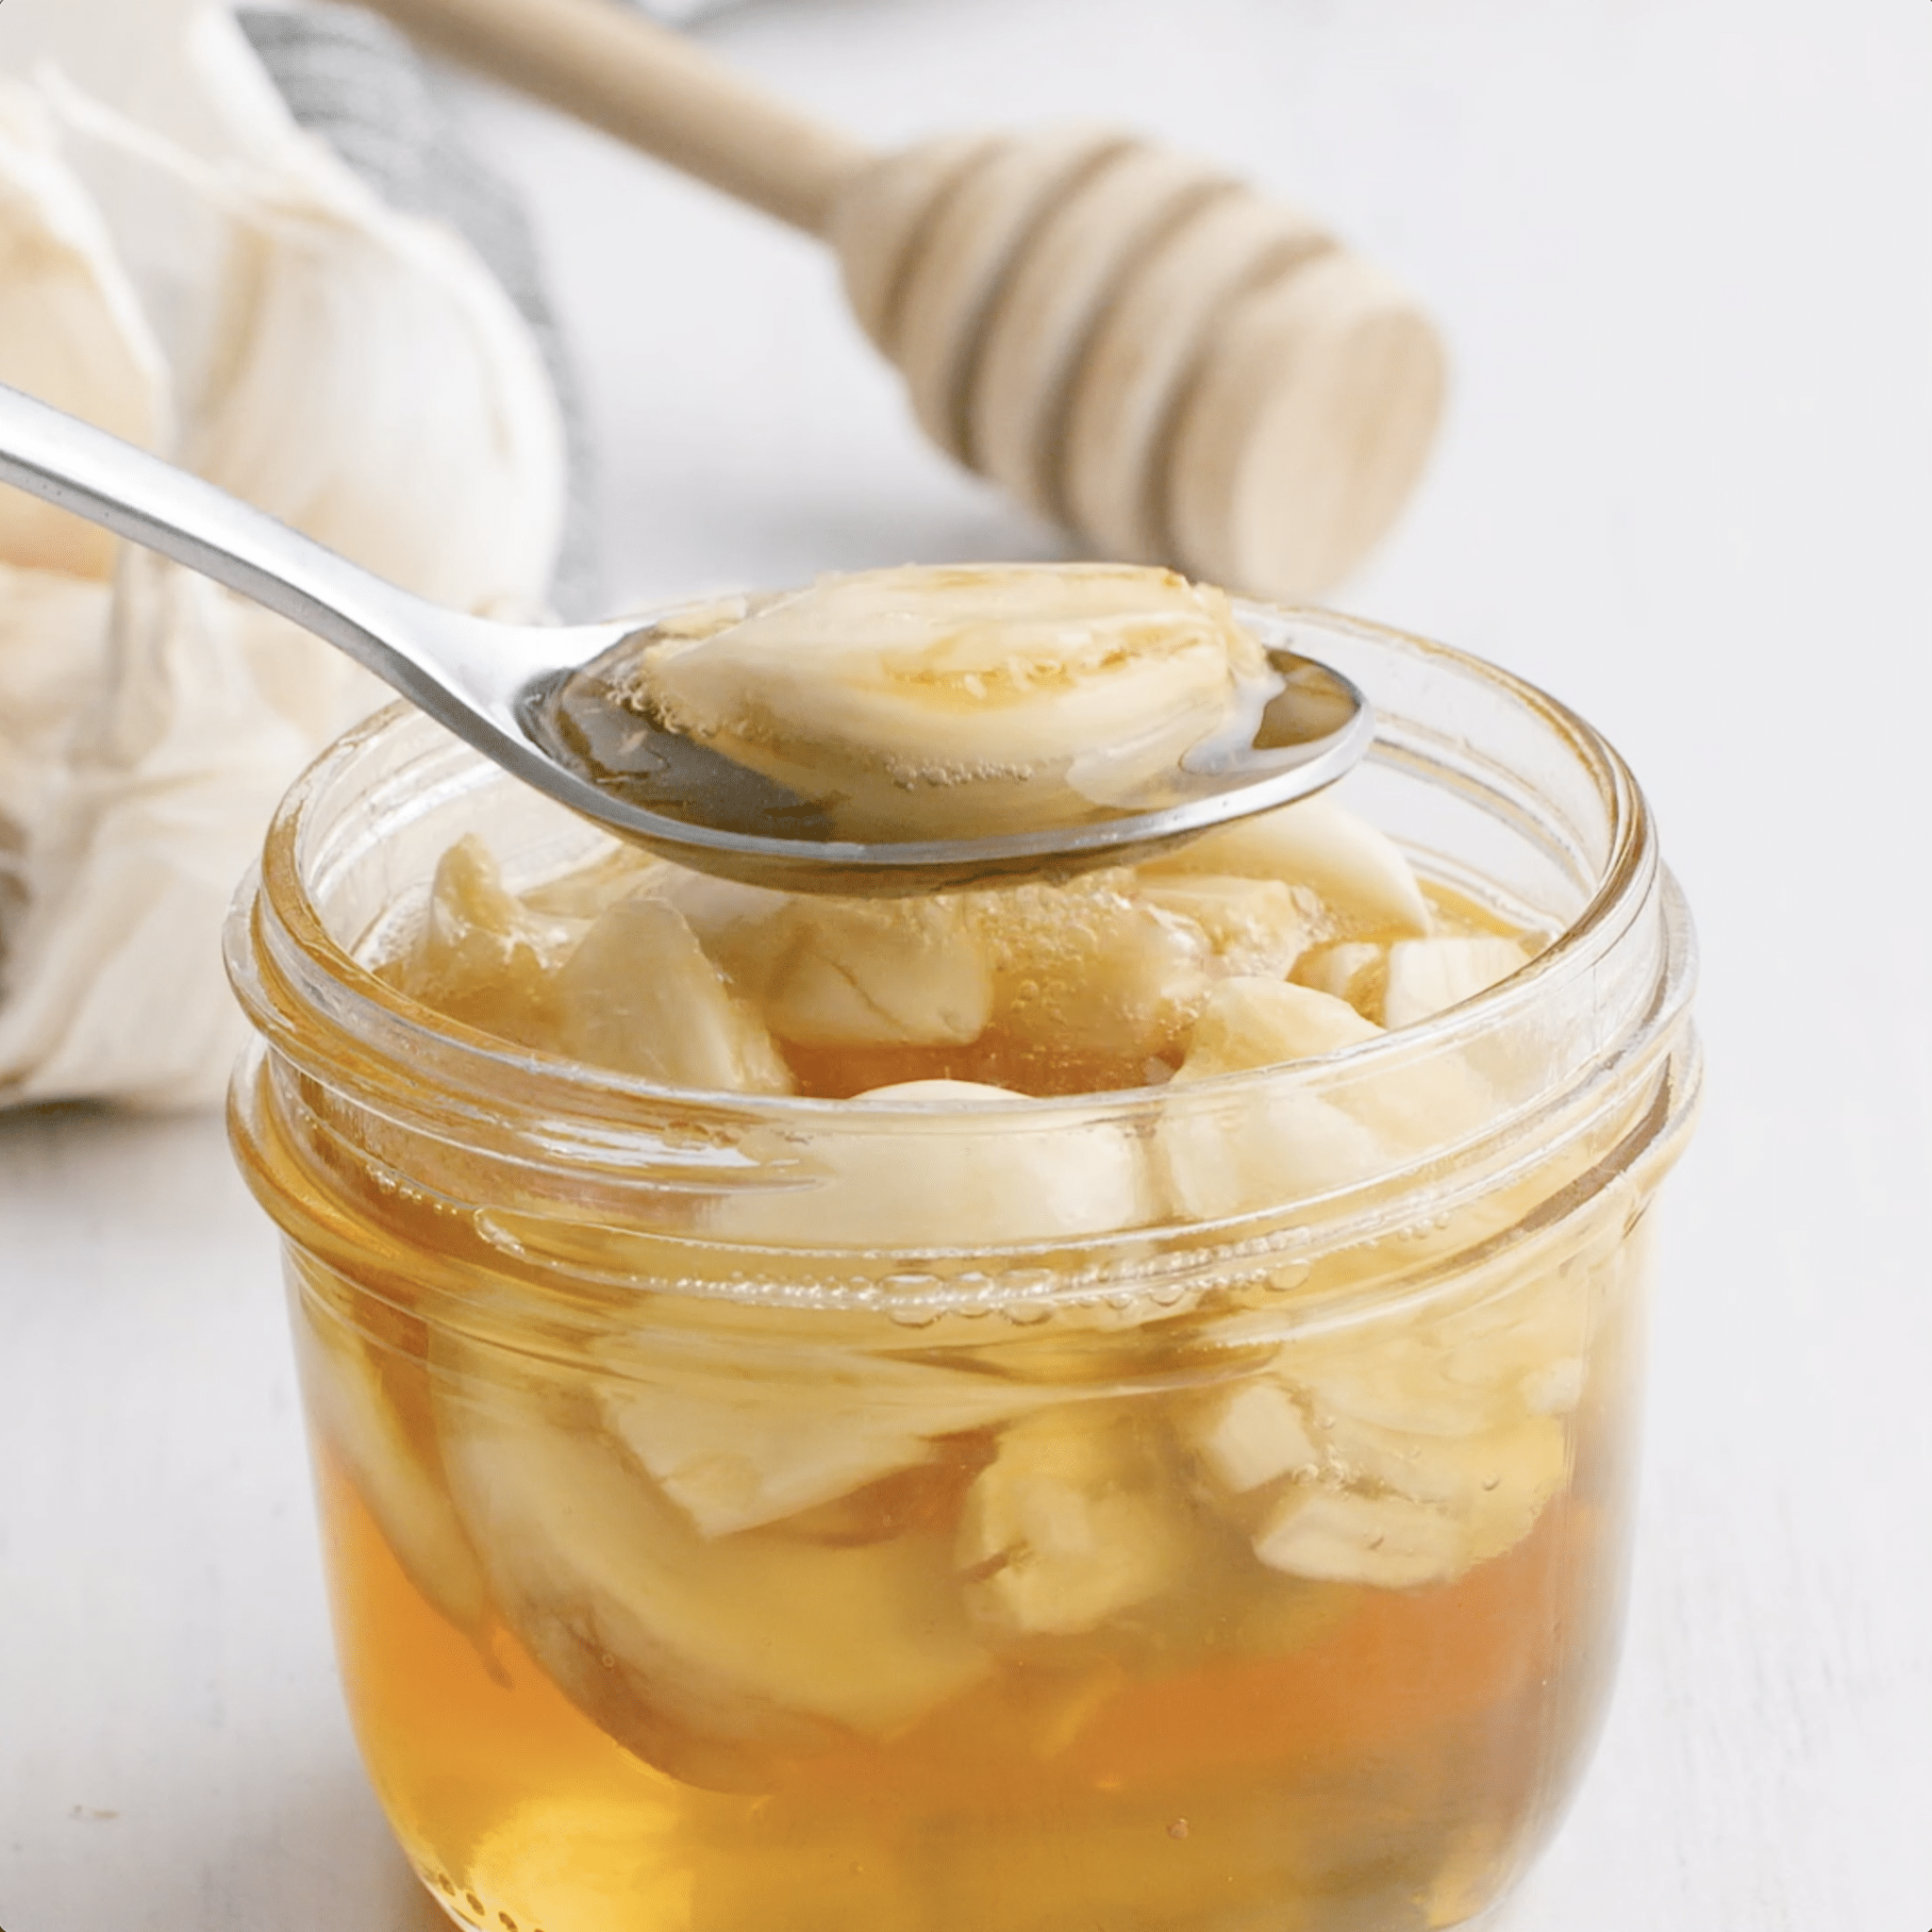 Spoon scooping out crushed garlic from a mason jar full of honey and garlic